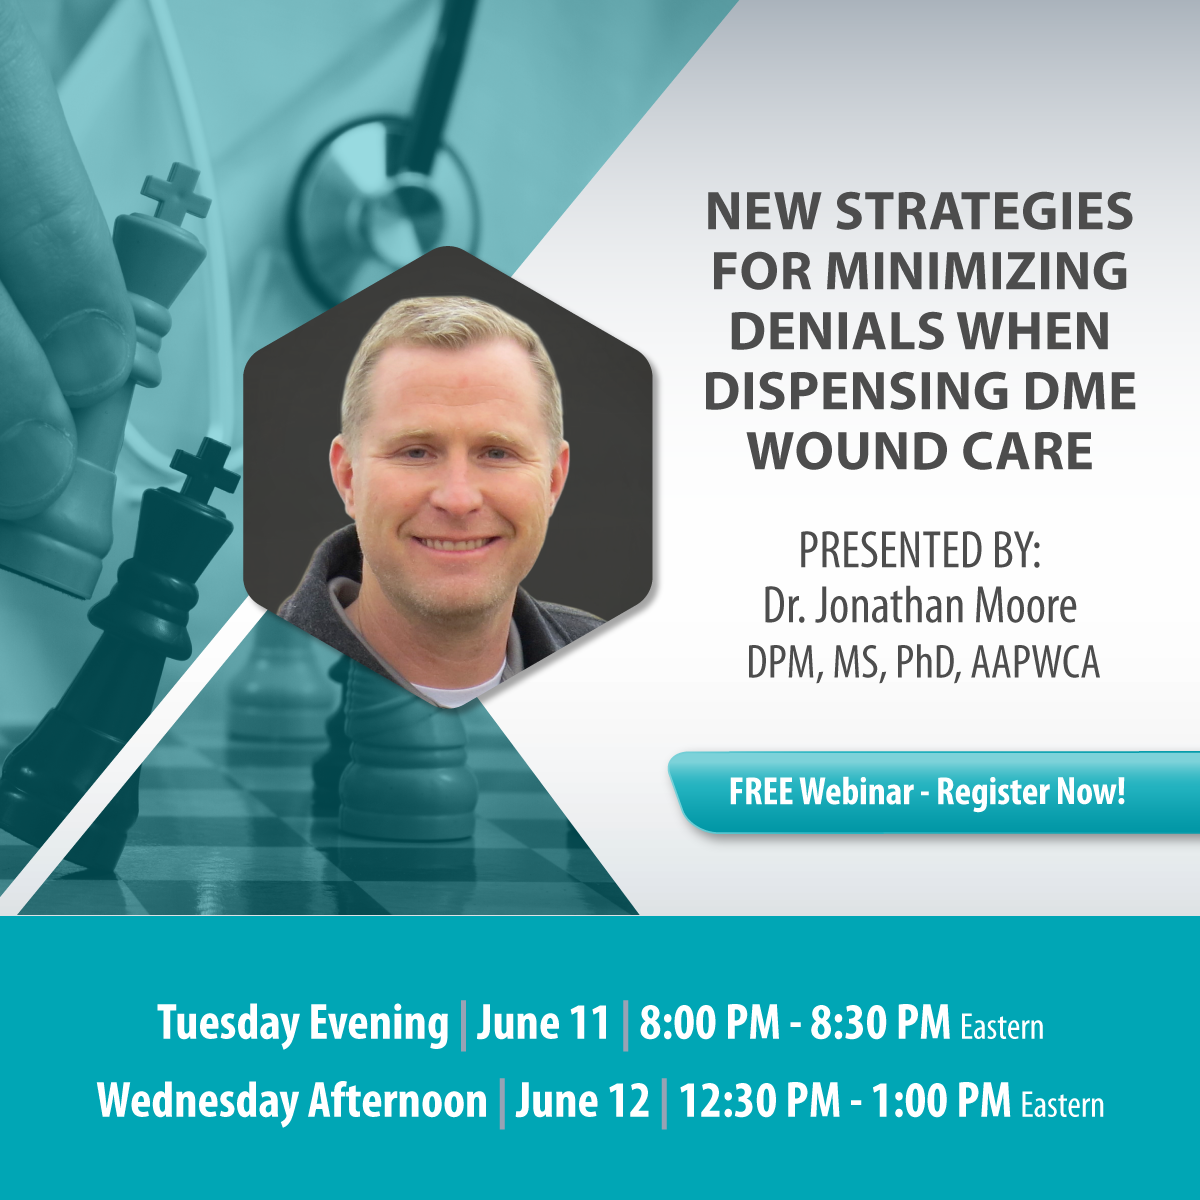 Webinar - New Strategies for Minimizing Denials When Dispensing DME Wound Care